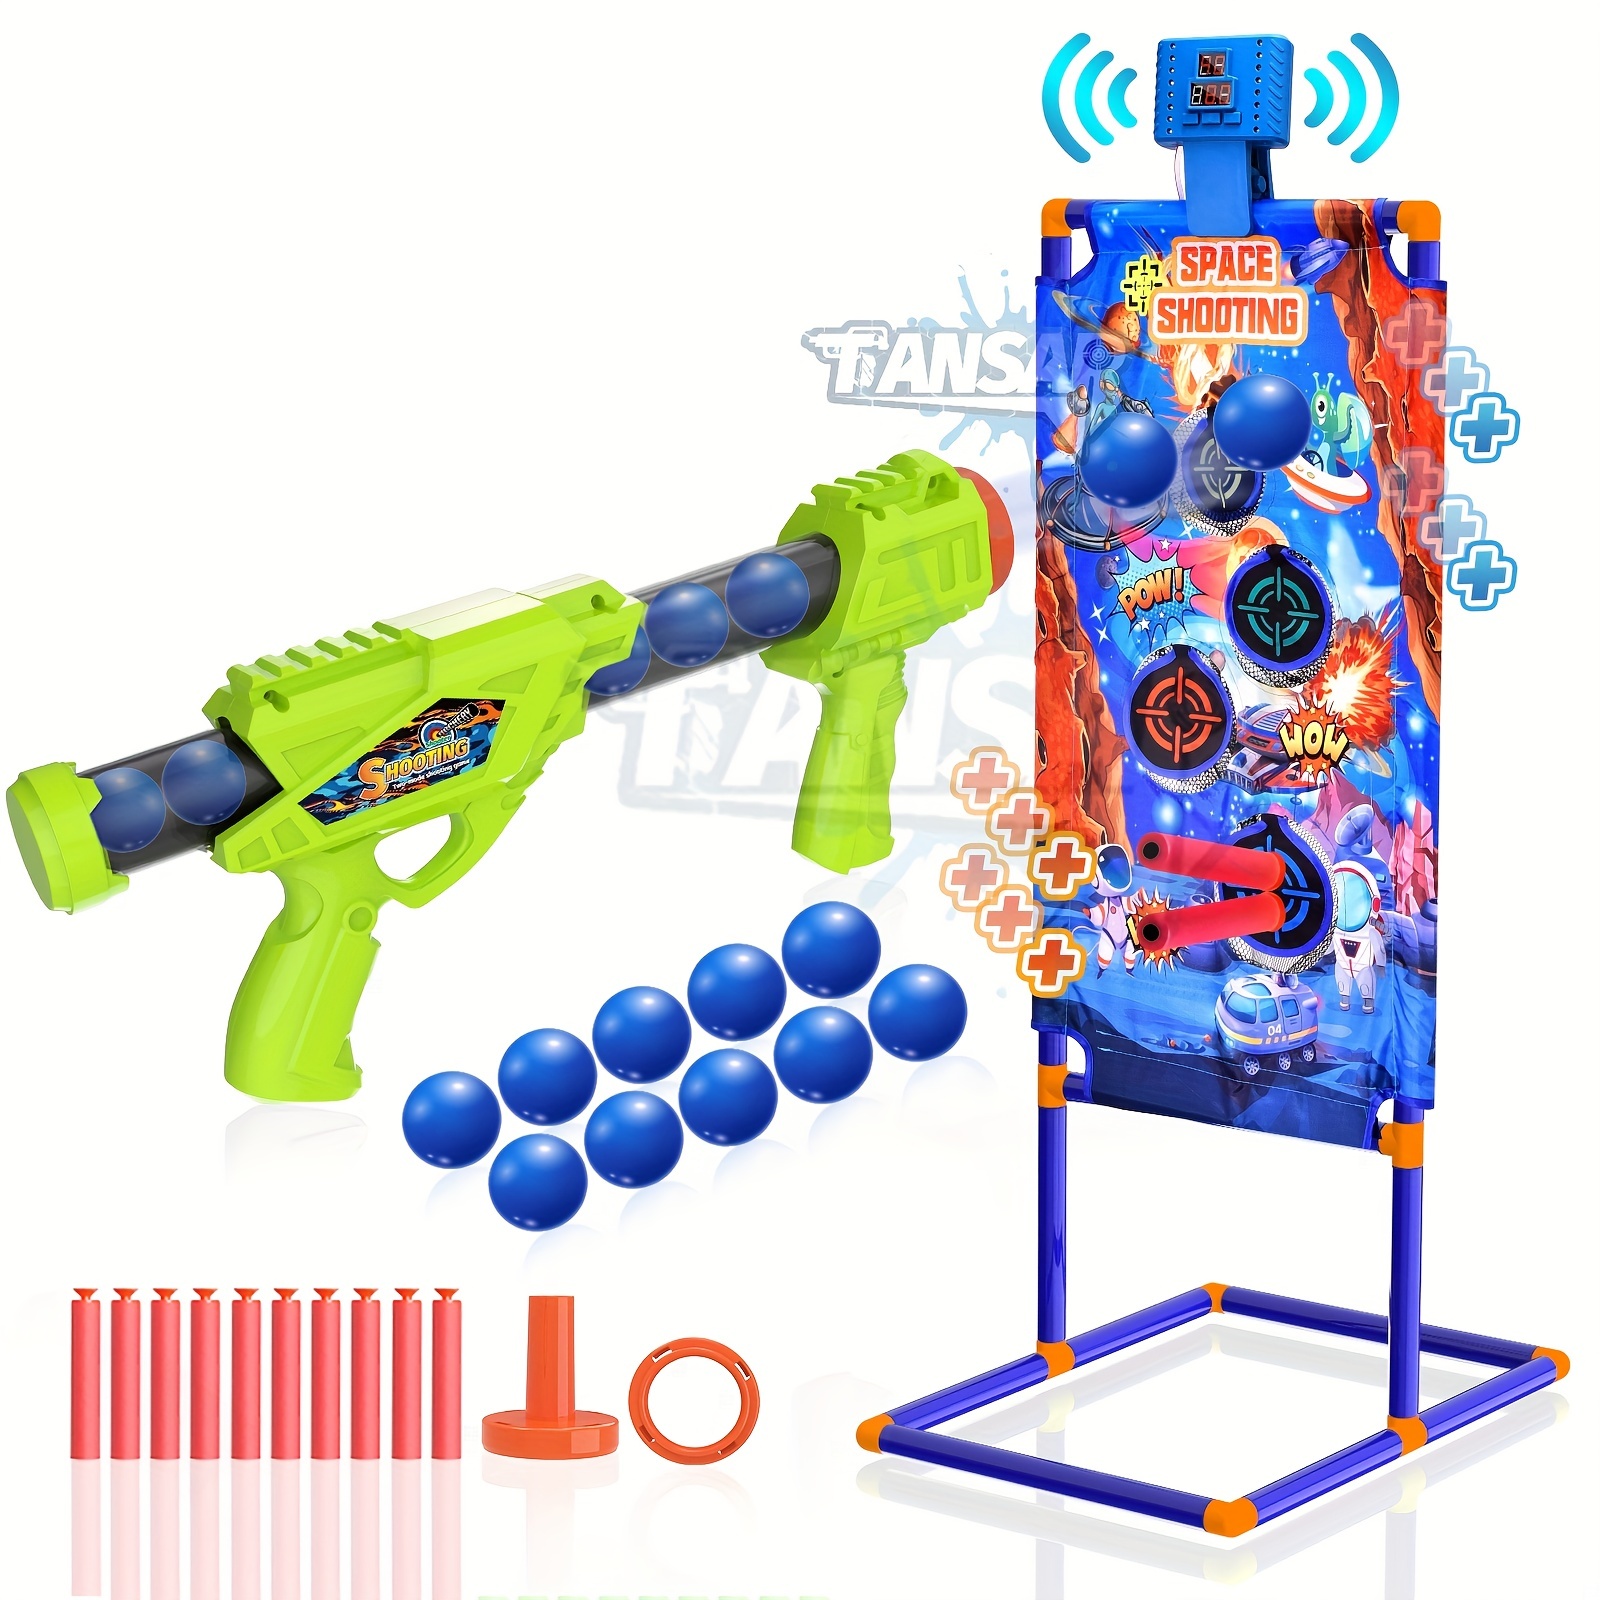 Tansar Gel Ball Blaster Accessories Shooting Games Target Gift Ideas For Age 4 5 6 7 8 9 10+ Years Old Boys And Girls, Compatible With Nerf Guns And Splatter Ball Gun